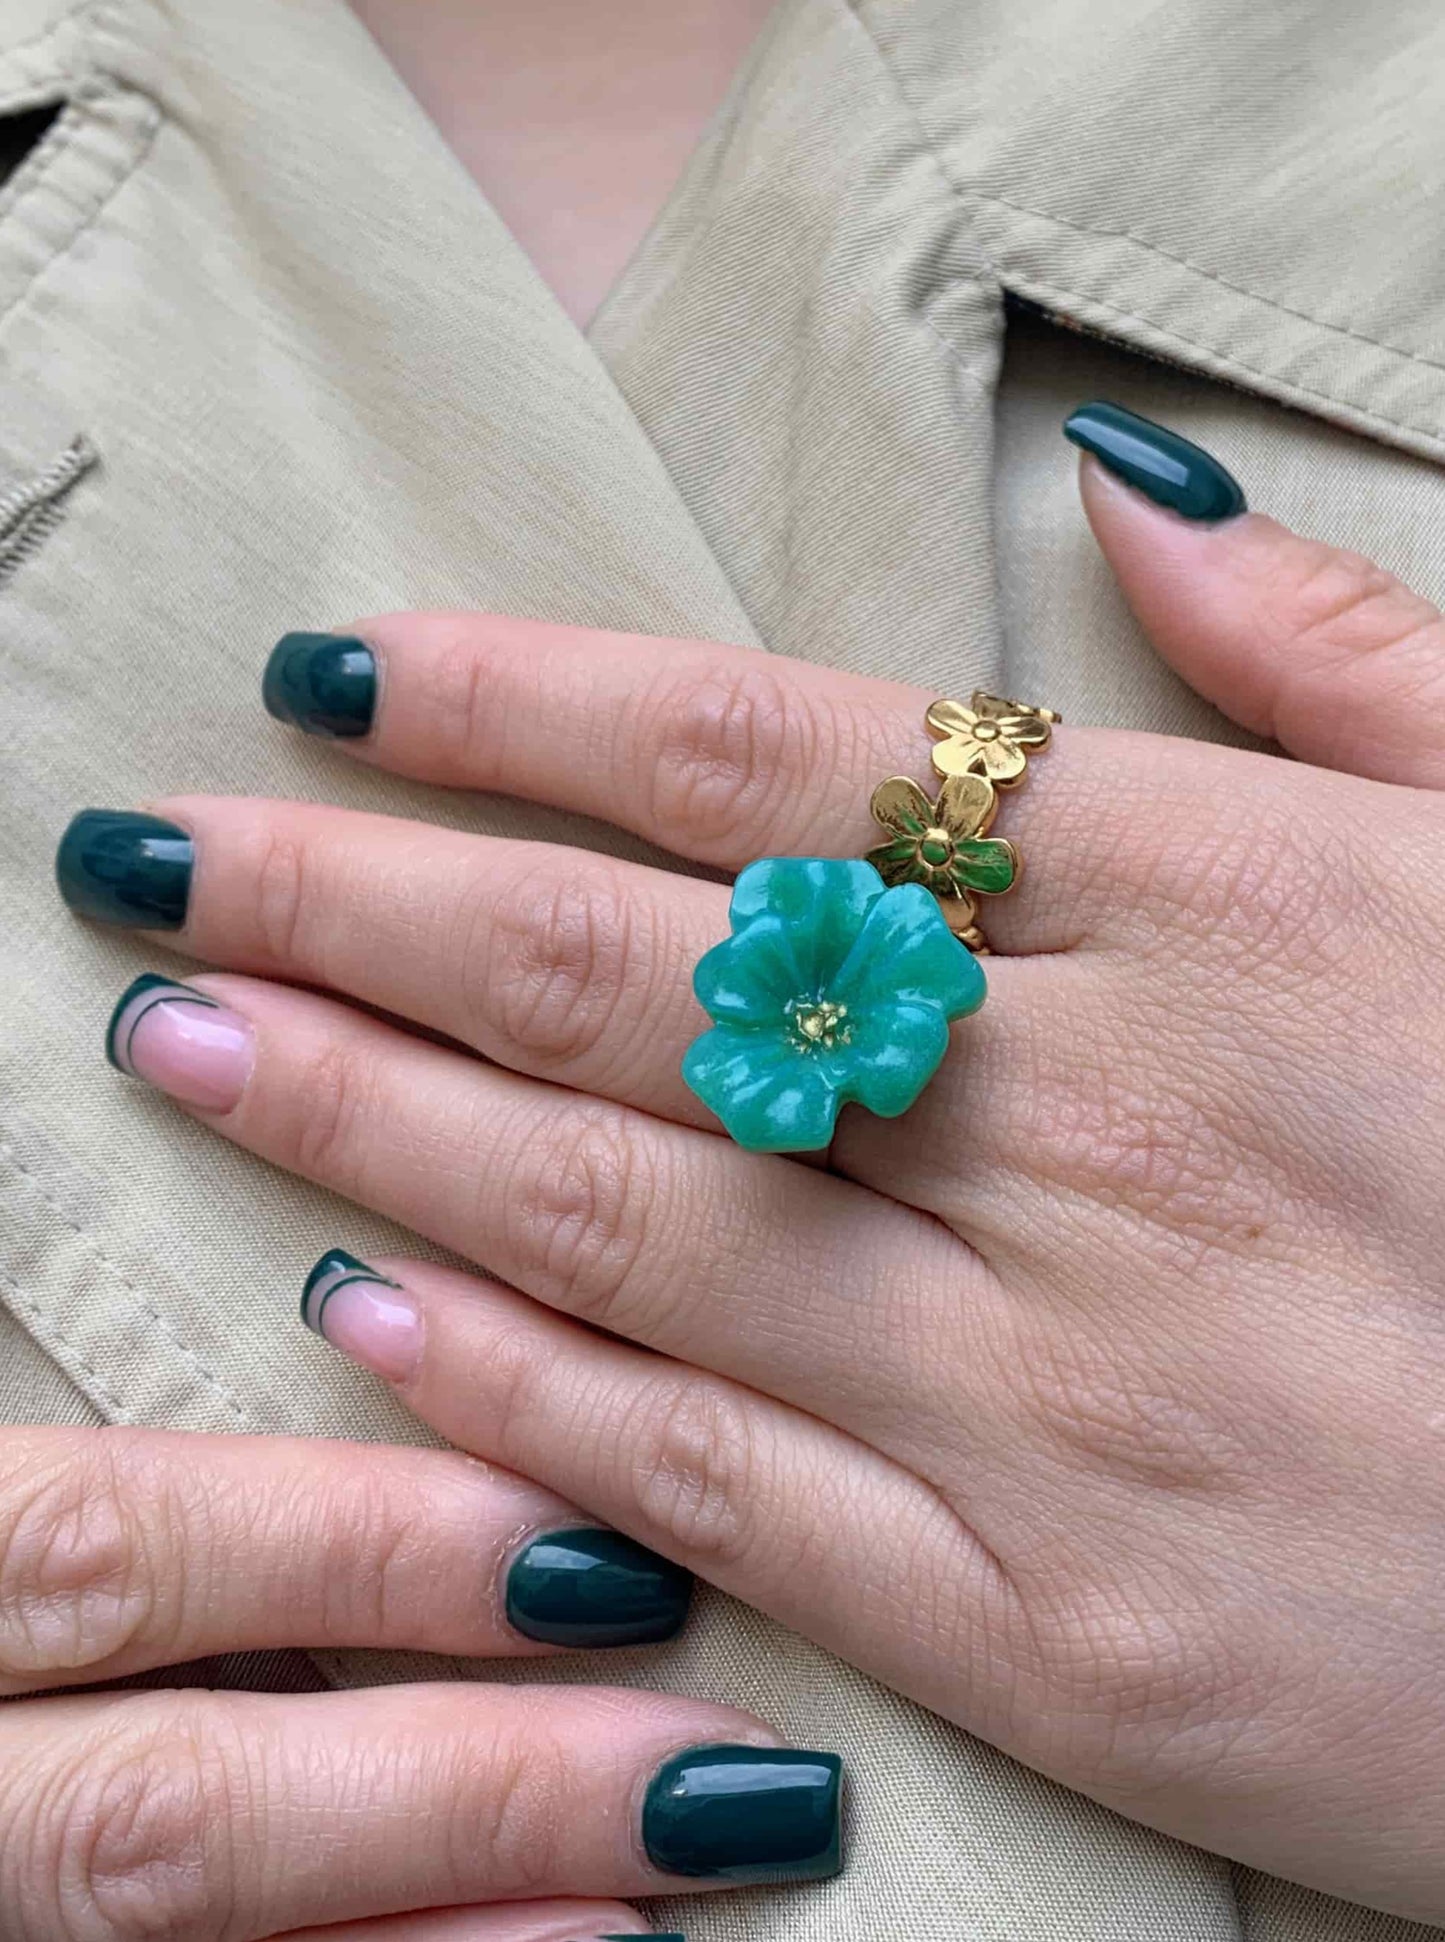 Flower Power ring - Buttercup - Turquoise blue